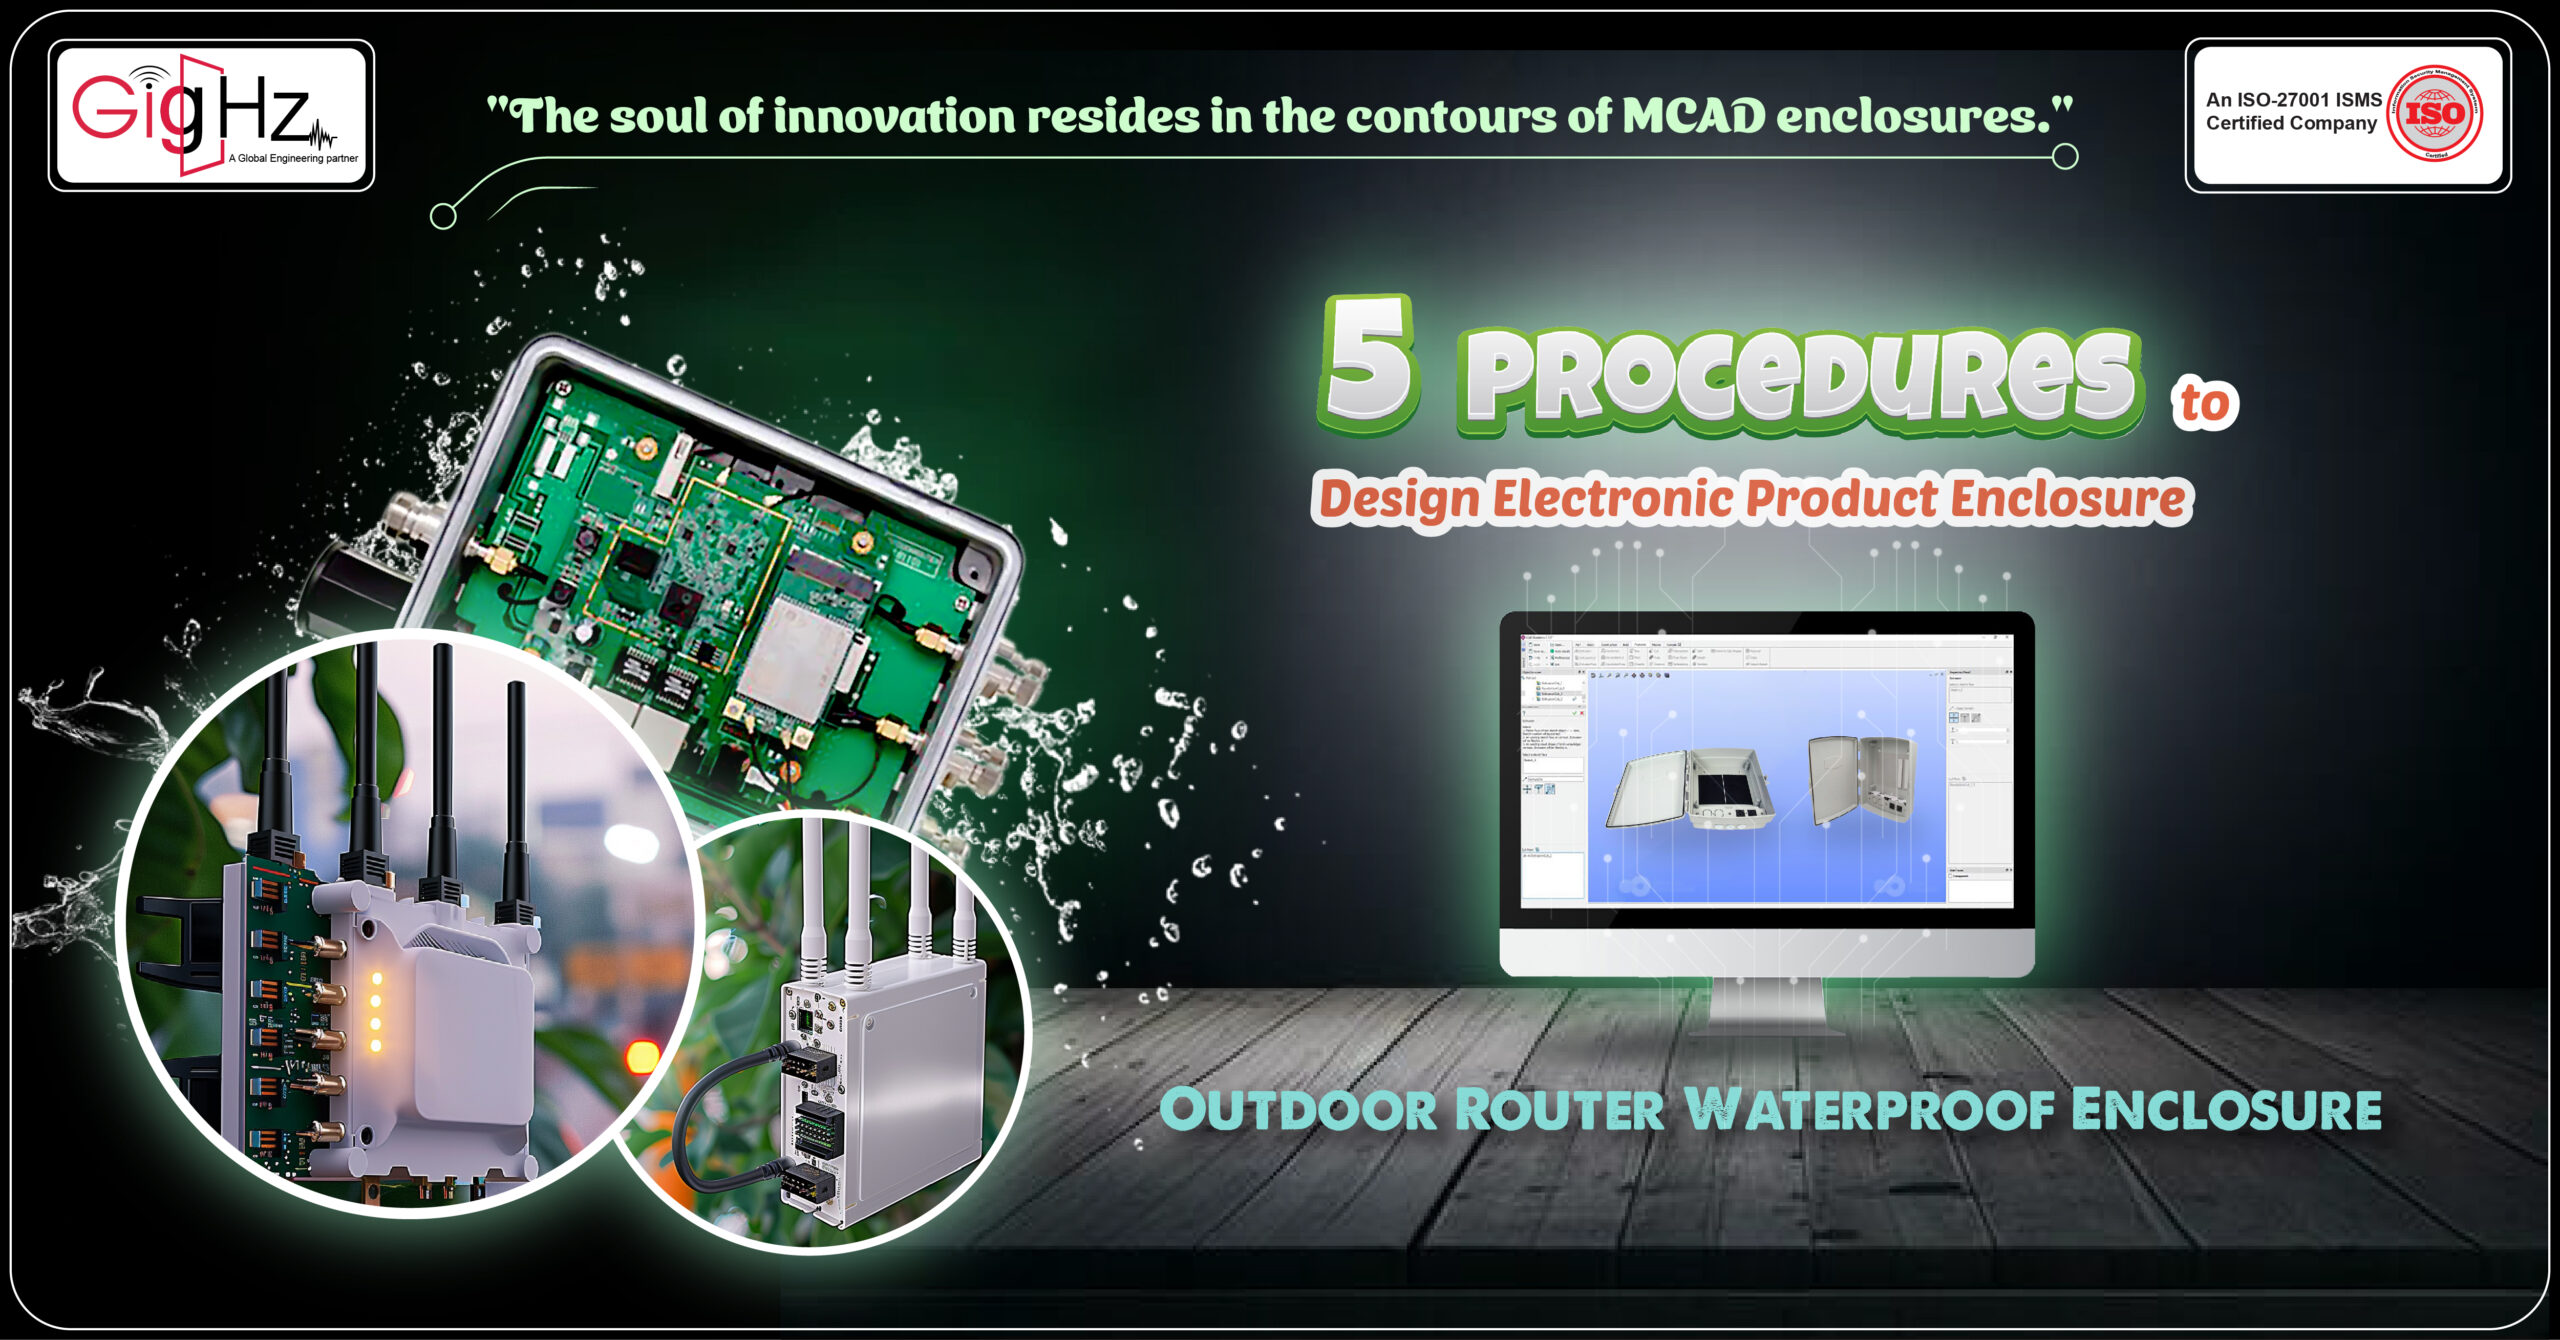 5 Procedures to Design Electronic Product Enclosure